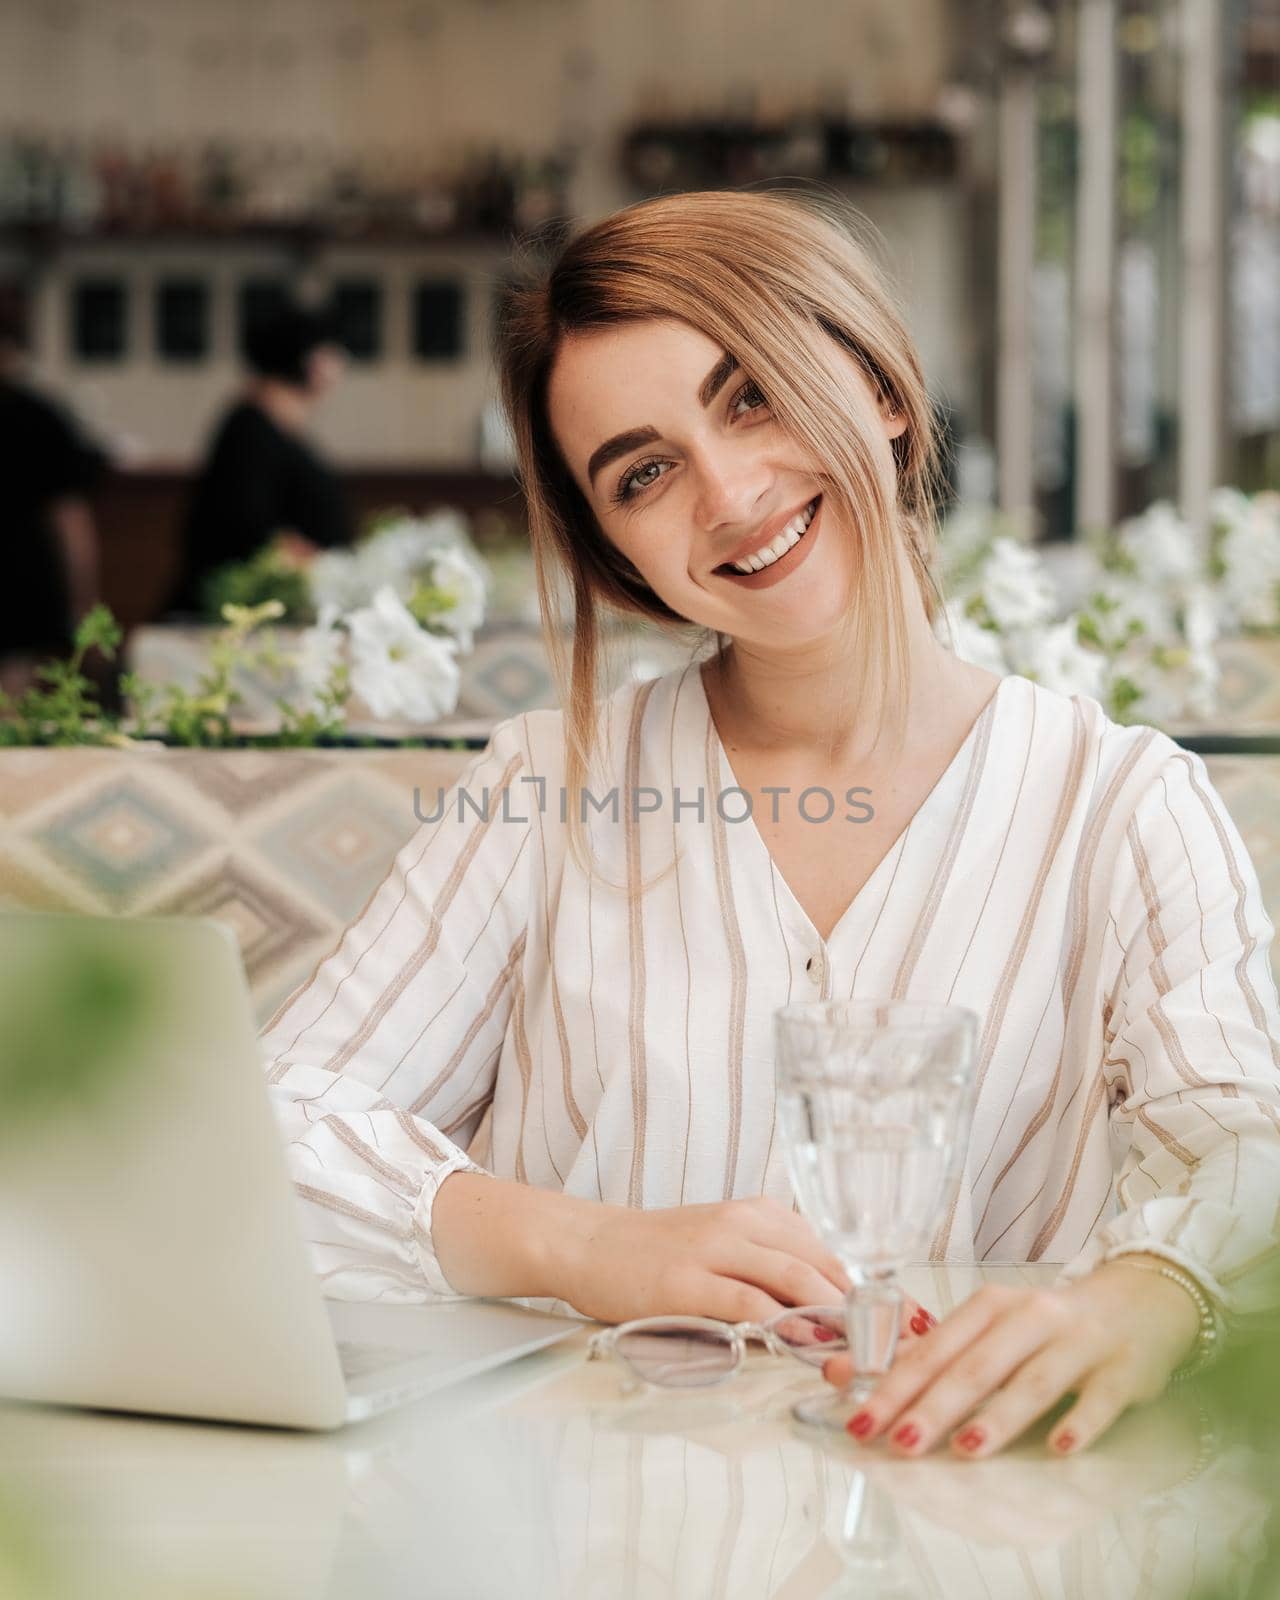 Cheerful Young Woman Smiling Straight Into the Camera, Female Working on Laptop While Having Lunch in the Restaurant by Romvy